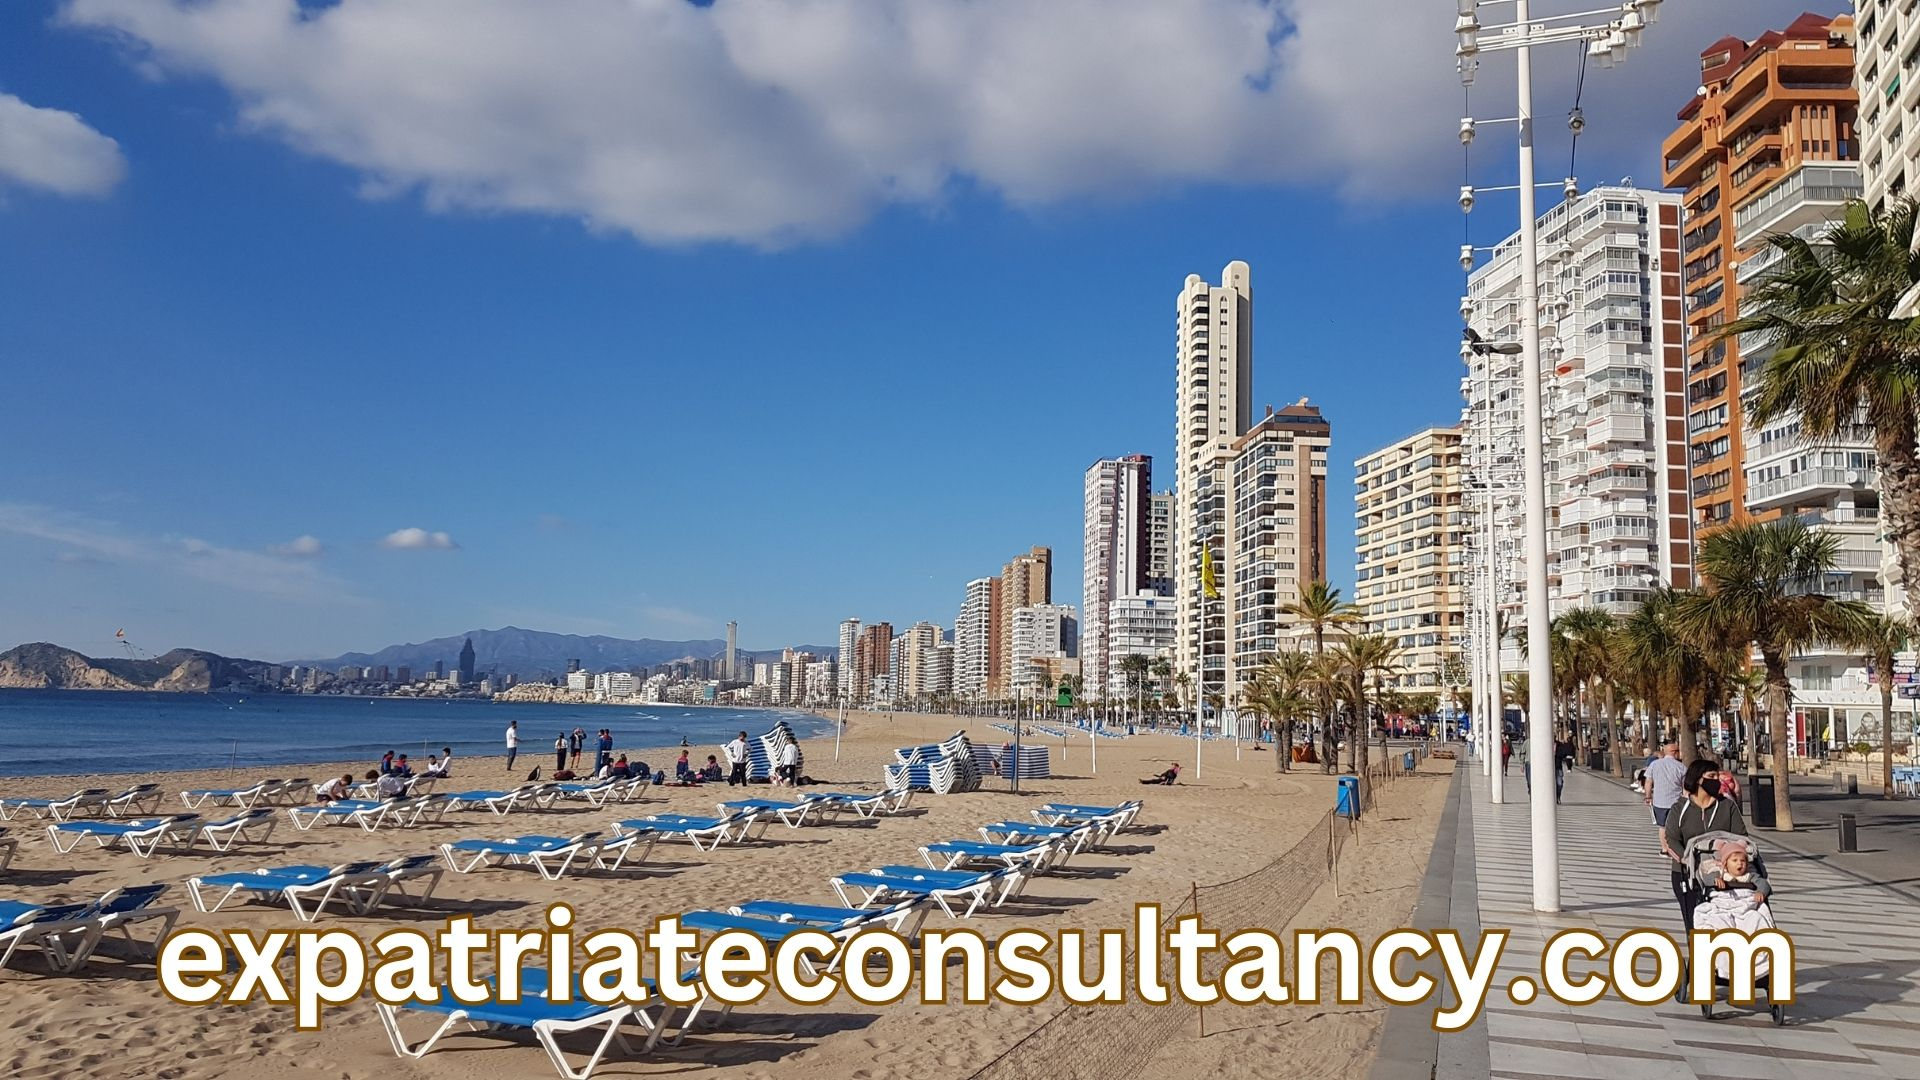 Benidorm, 45 kilometers from Alicante, the second best place to retire  in Spain